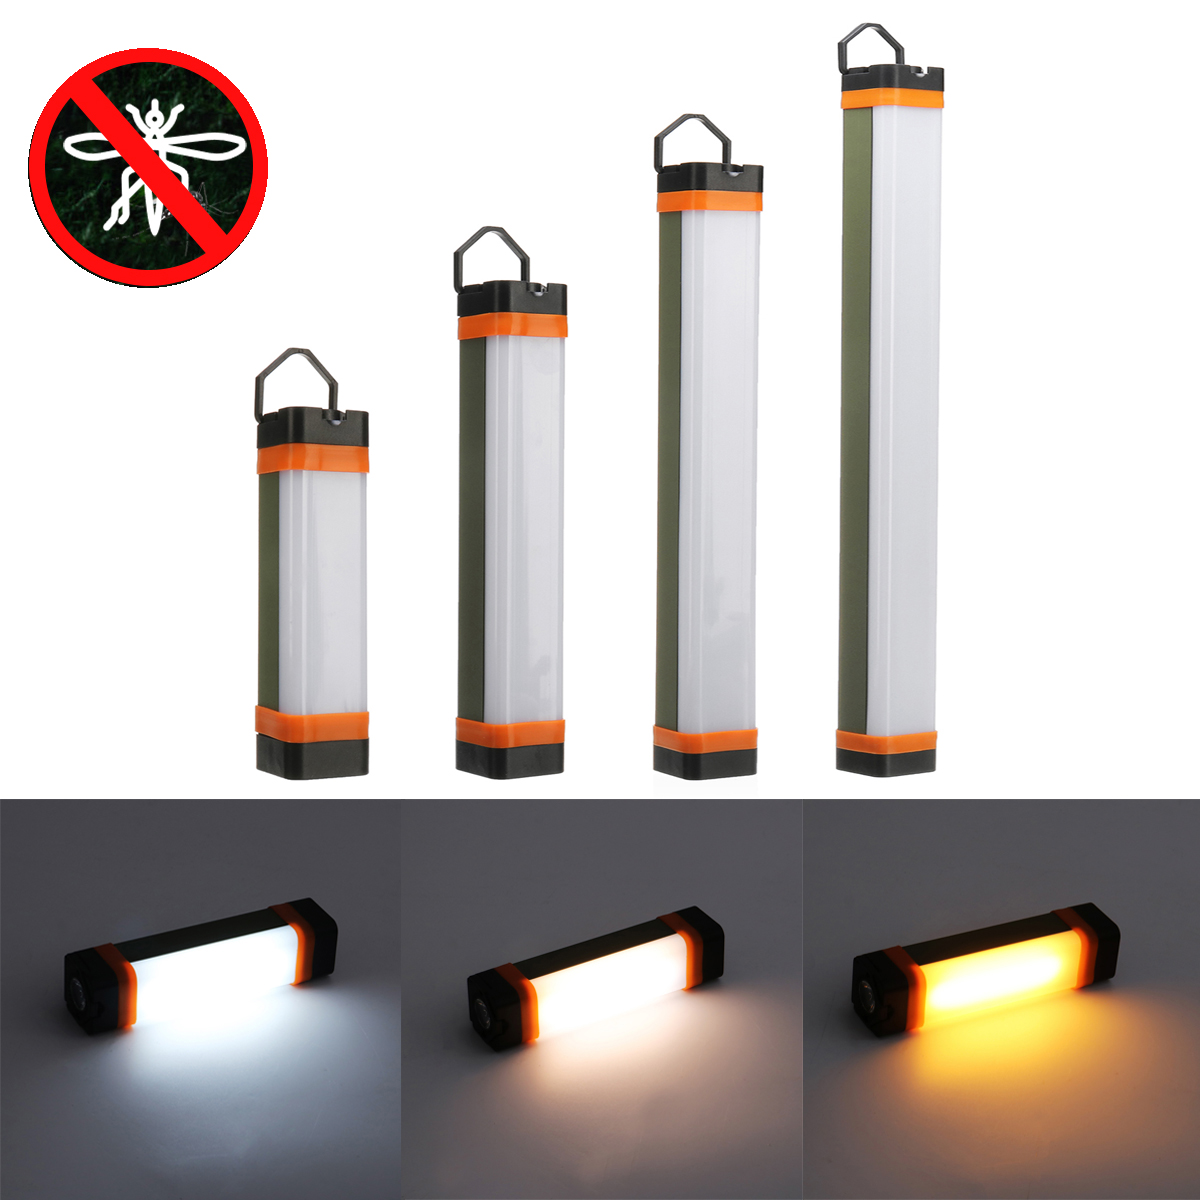 

2W/3.5W/5.5W/7.5W Outdoor Camping Magnetic Light Mosquito Repellent LED Lamp 3 Modes USB Rechargeable Emergency Lantern